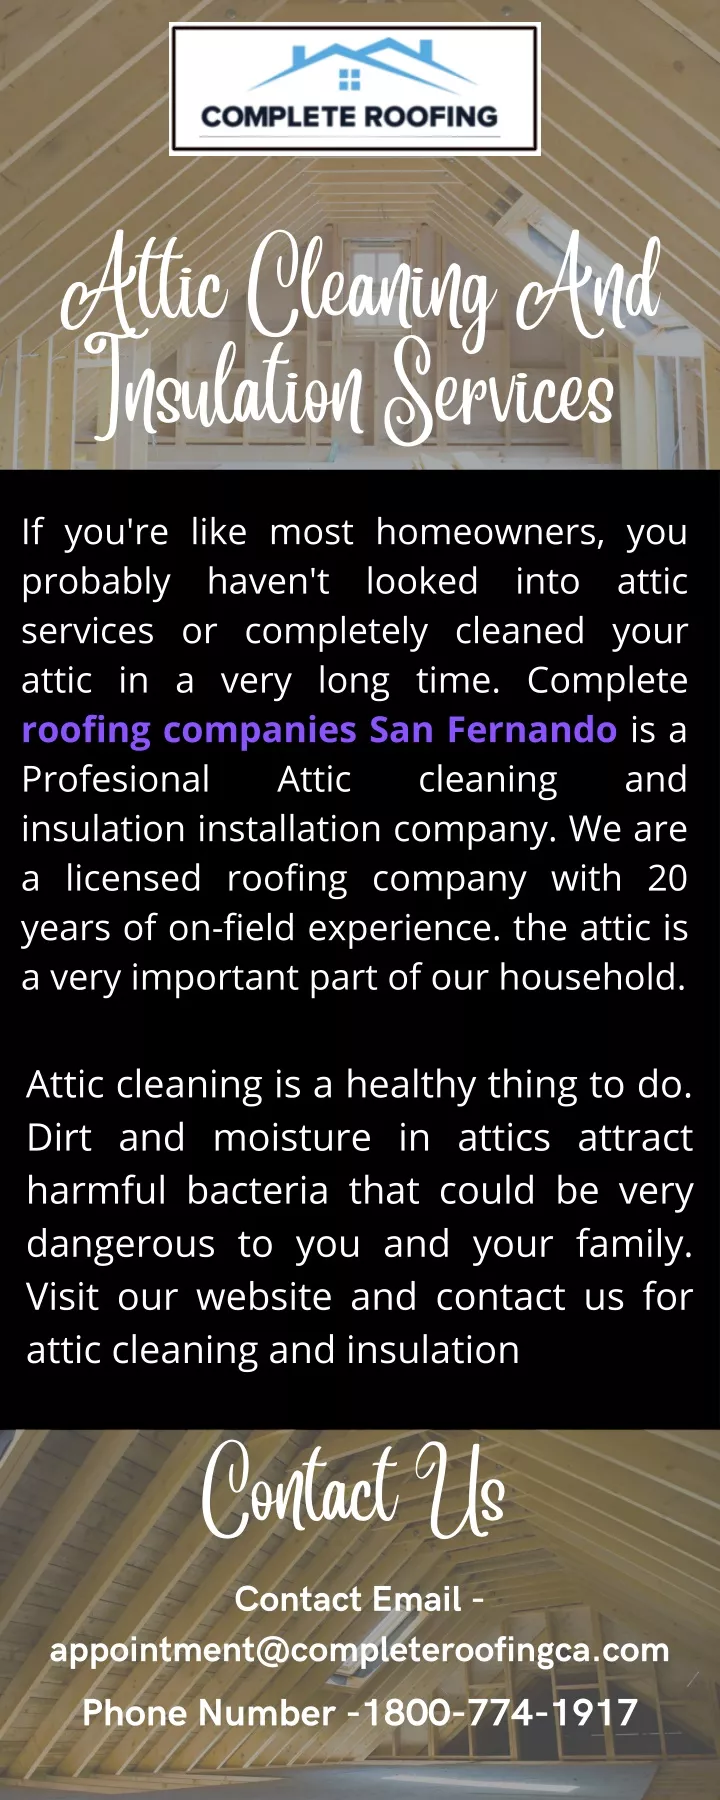 attic cleaning and insulation services